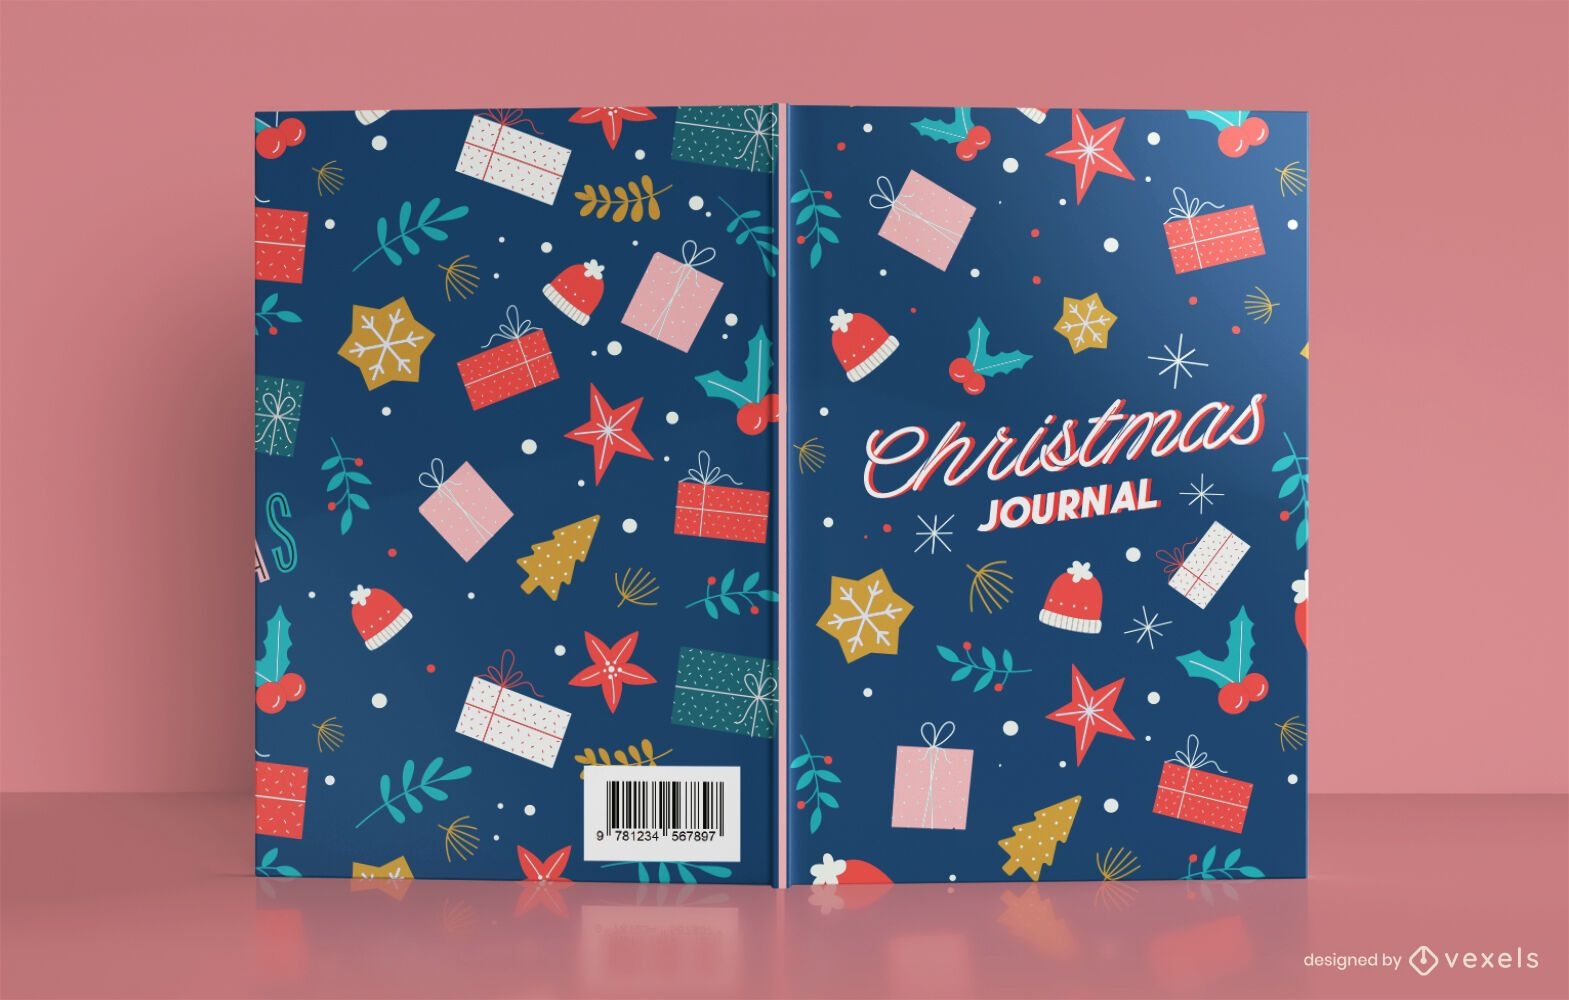 Christmas Journal Patter Book Cover Design